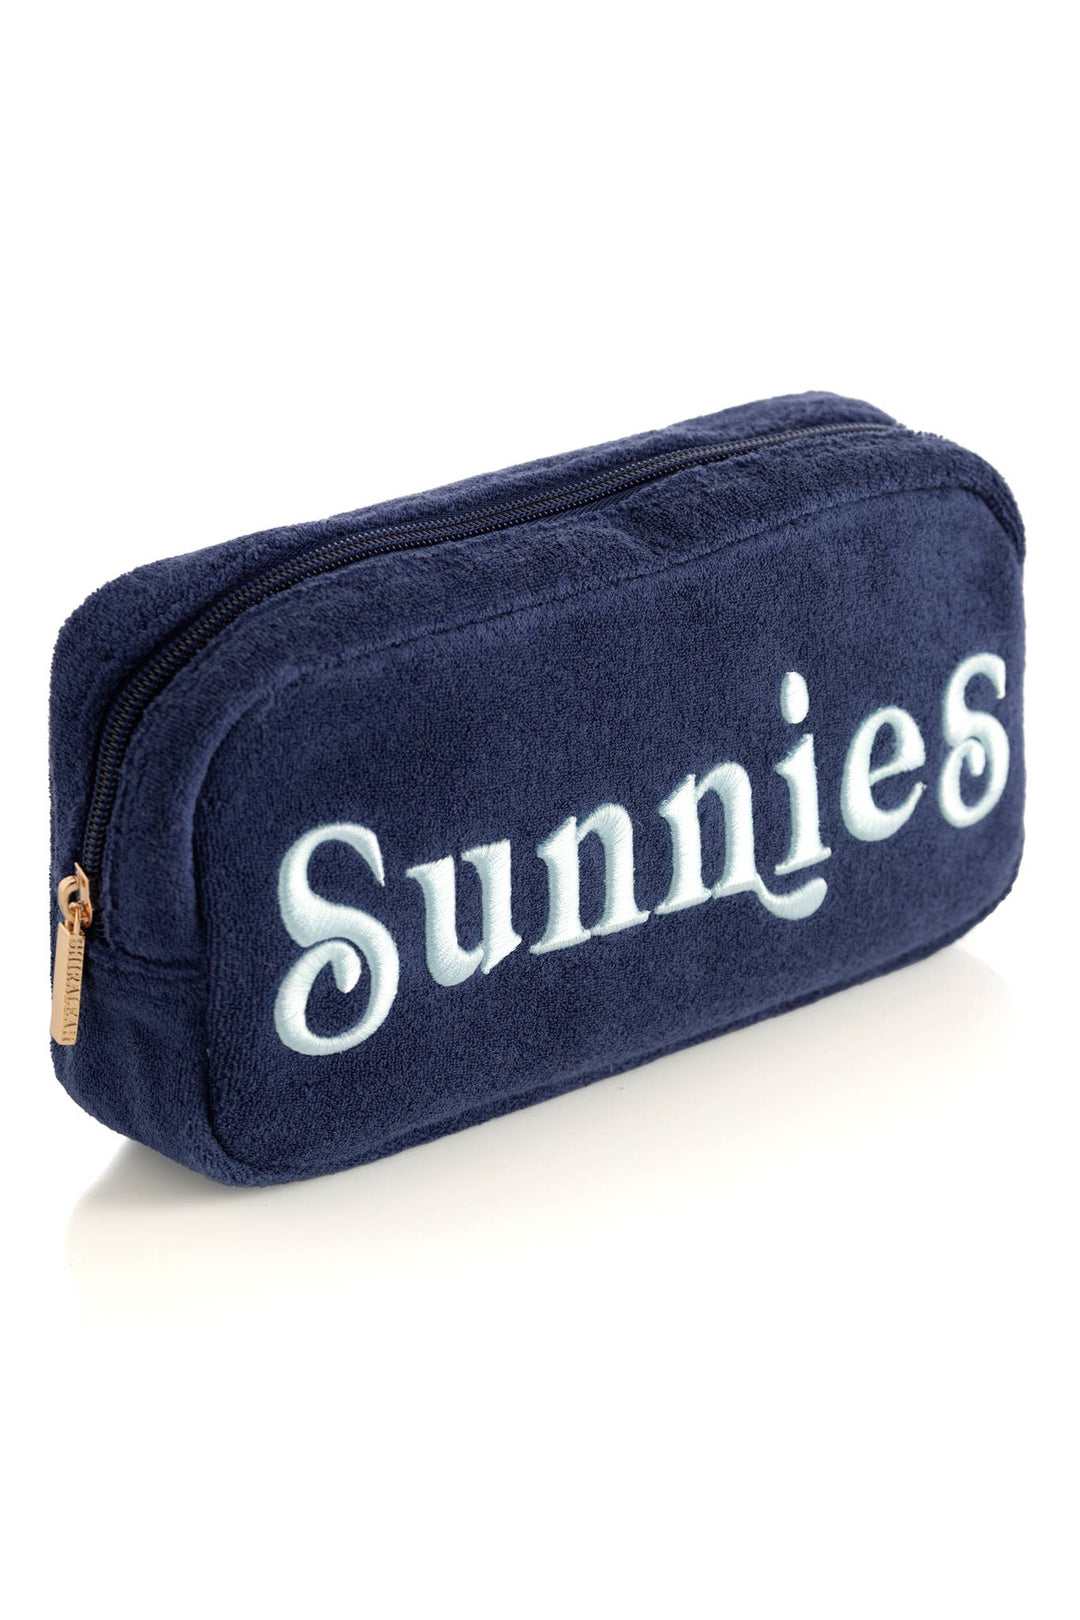 Sunnies Zip Pouch - Bloom and Petal